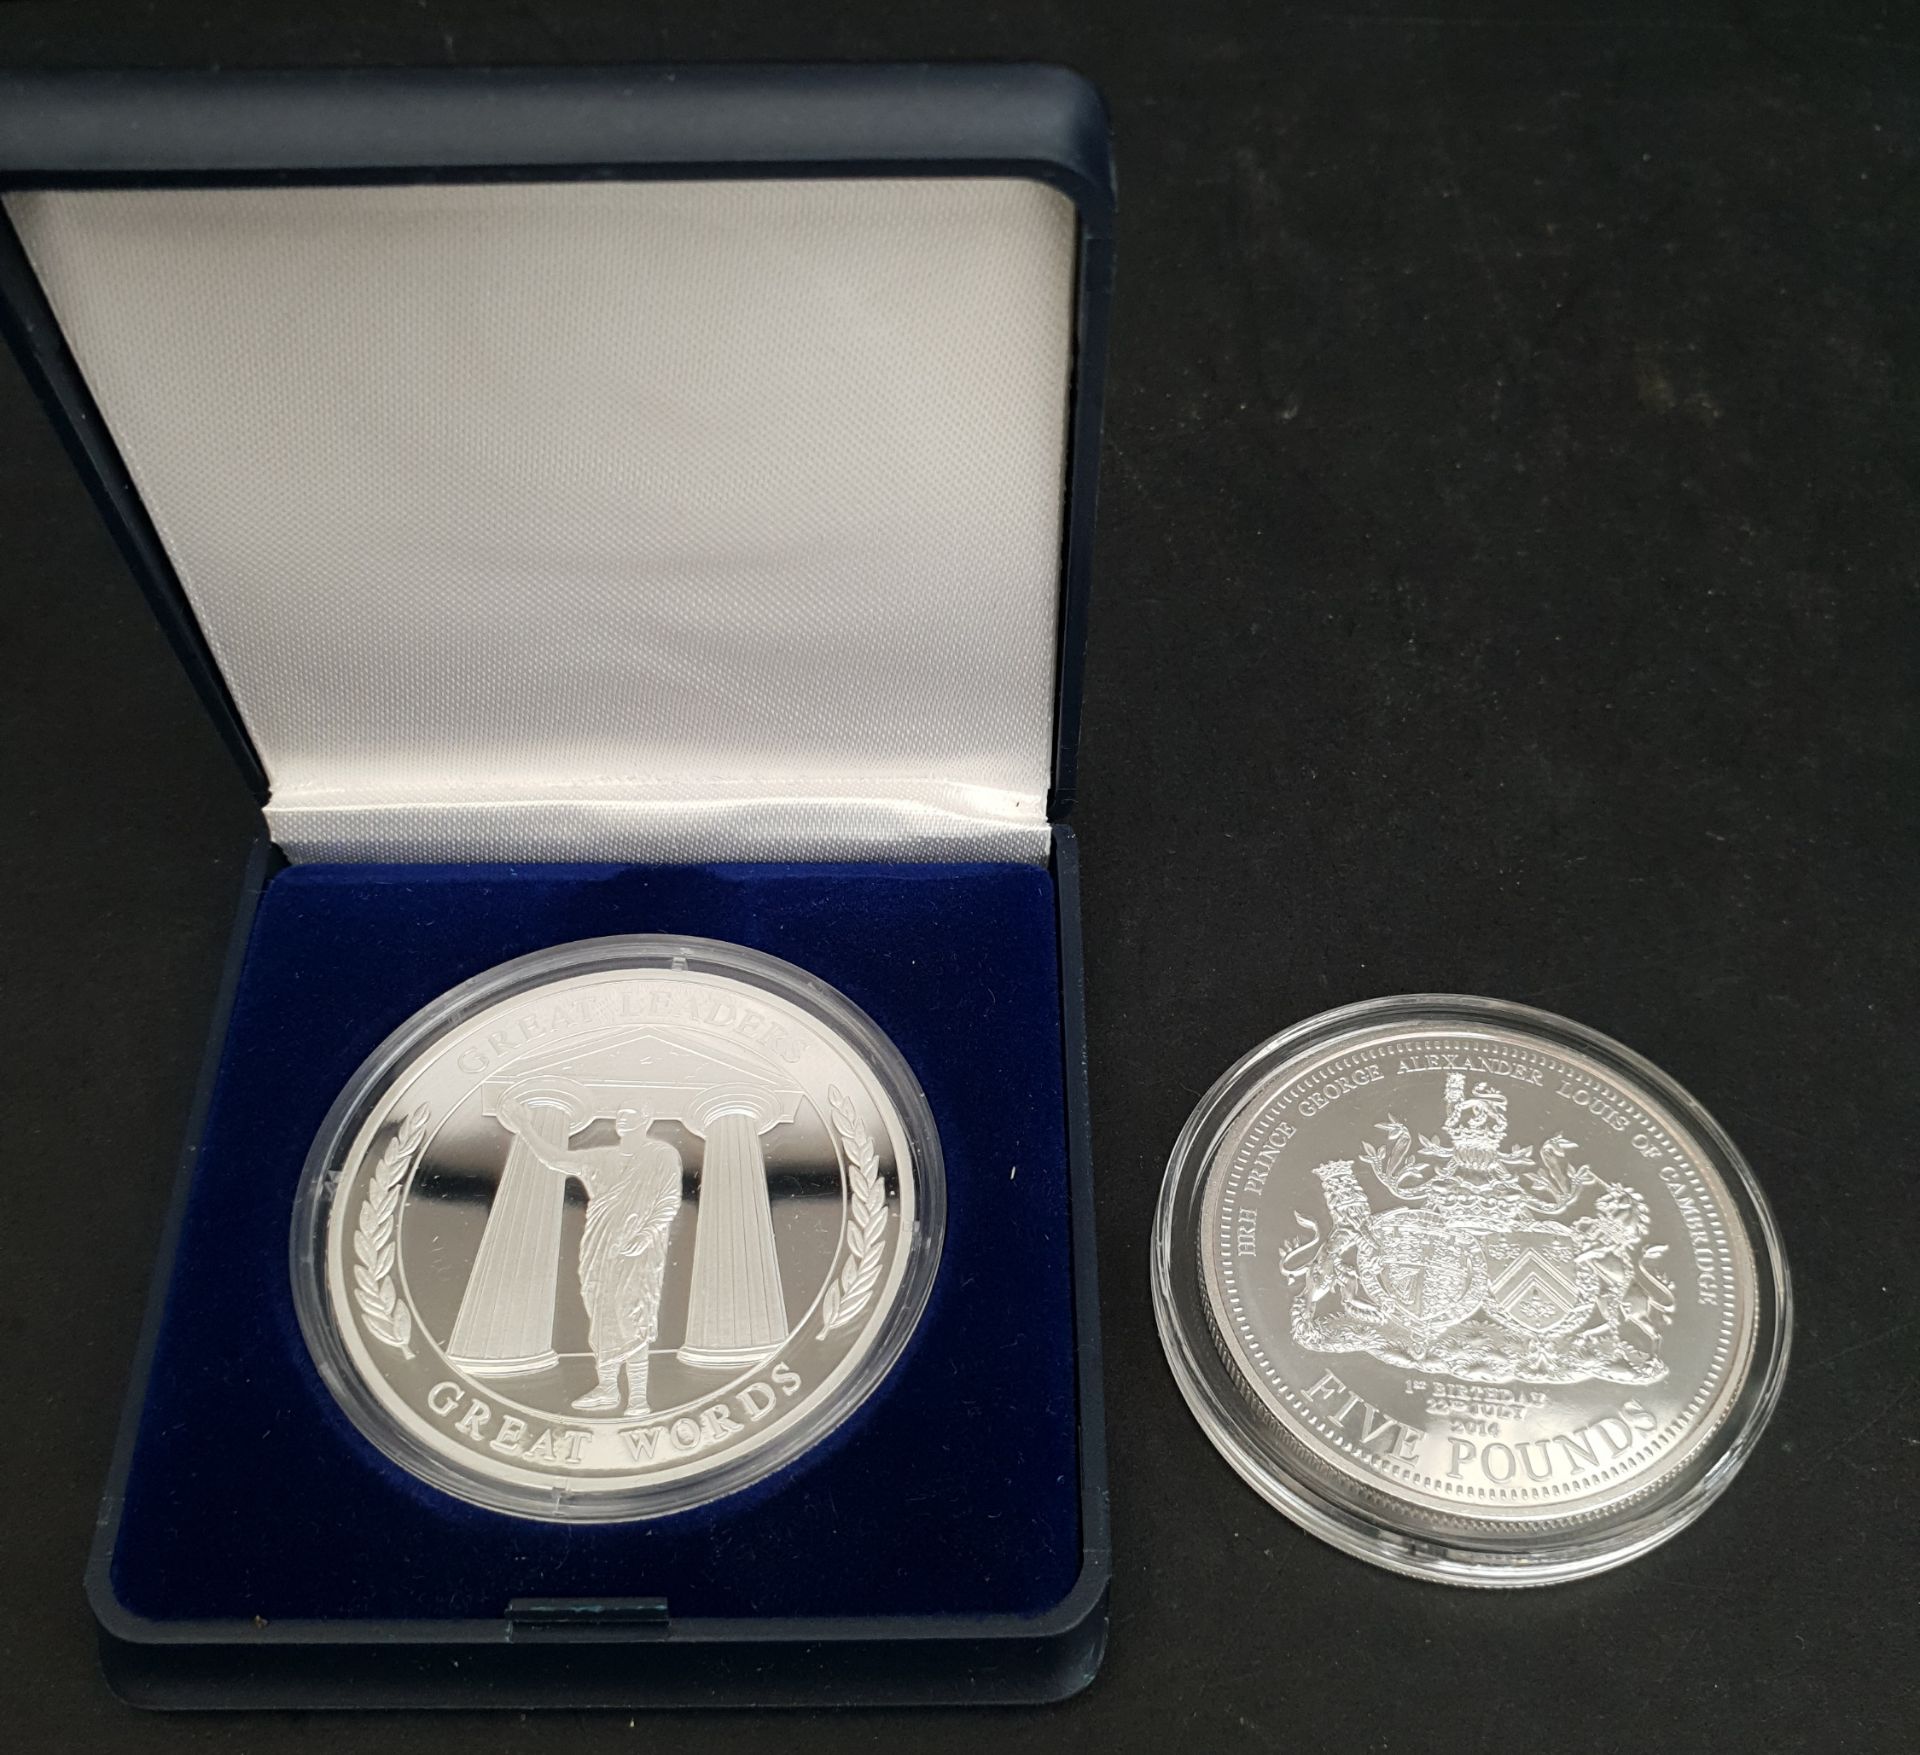 Collectable Coins Churchill Silver & Prince George 1st Birthday £5 Coin - Image 2 of 3